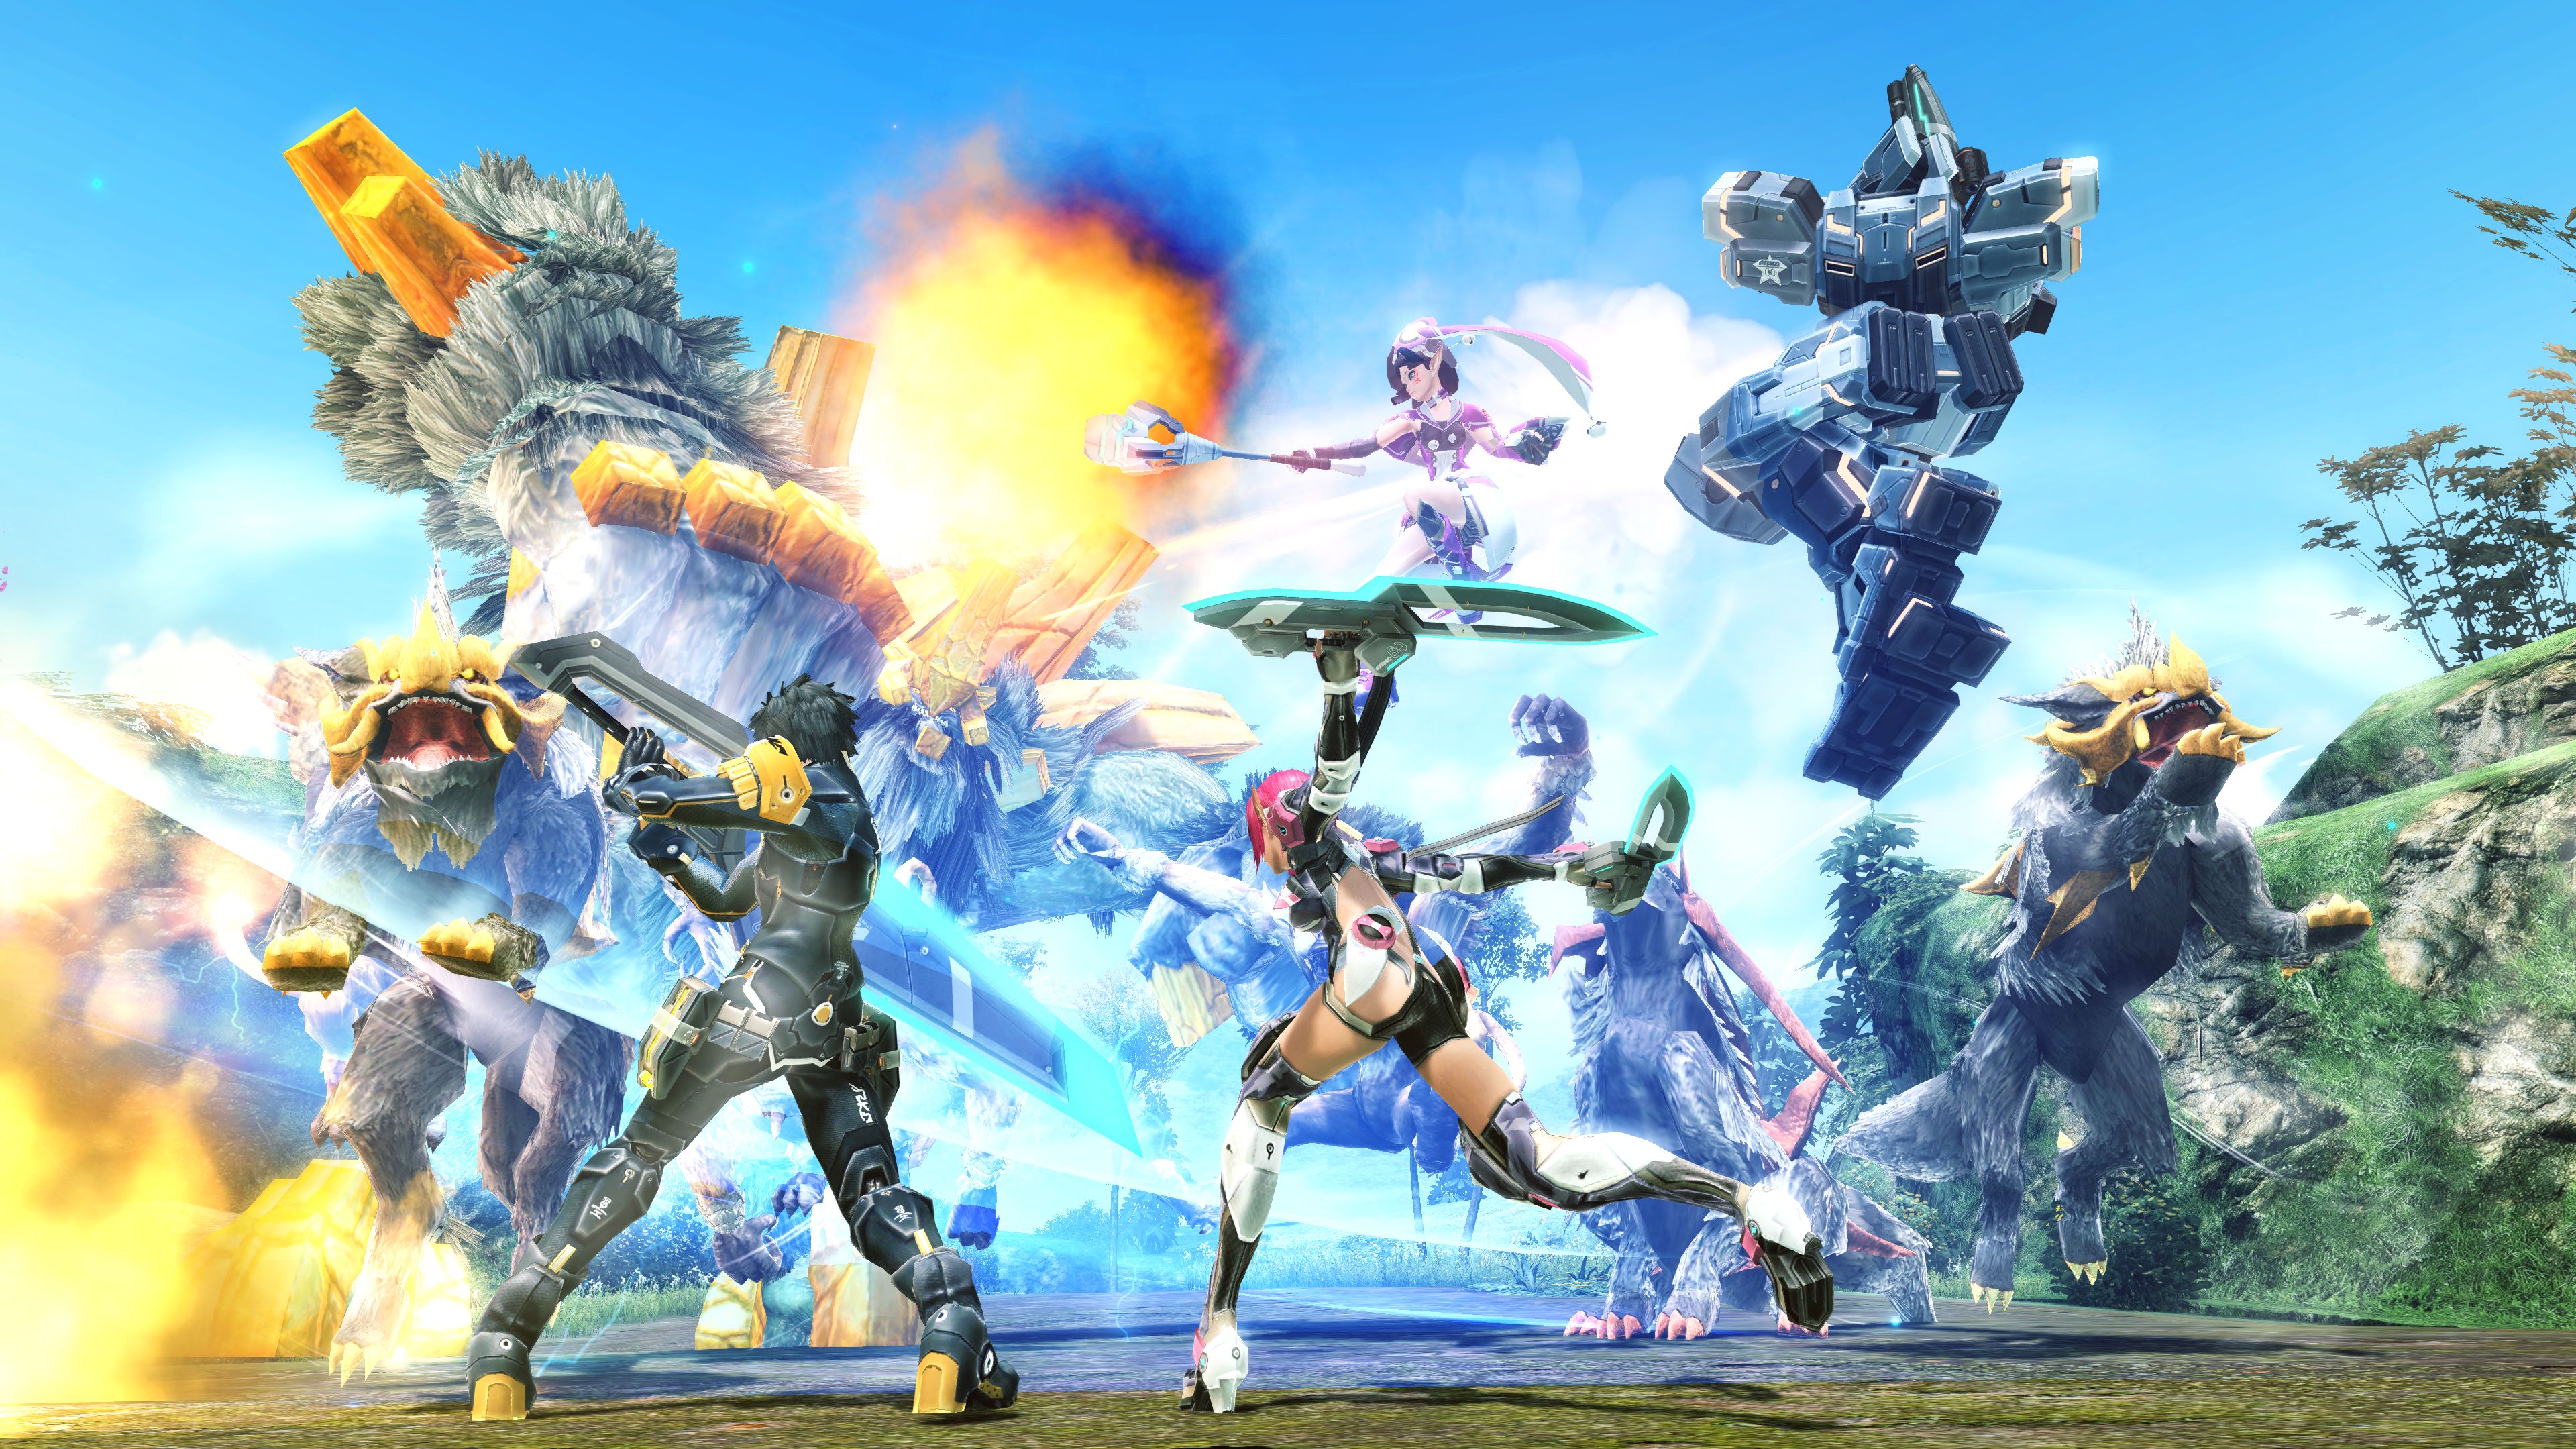 Image for Phantasy Star Online 2 hits PC next week in North America with Xbox One cross-play